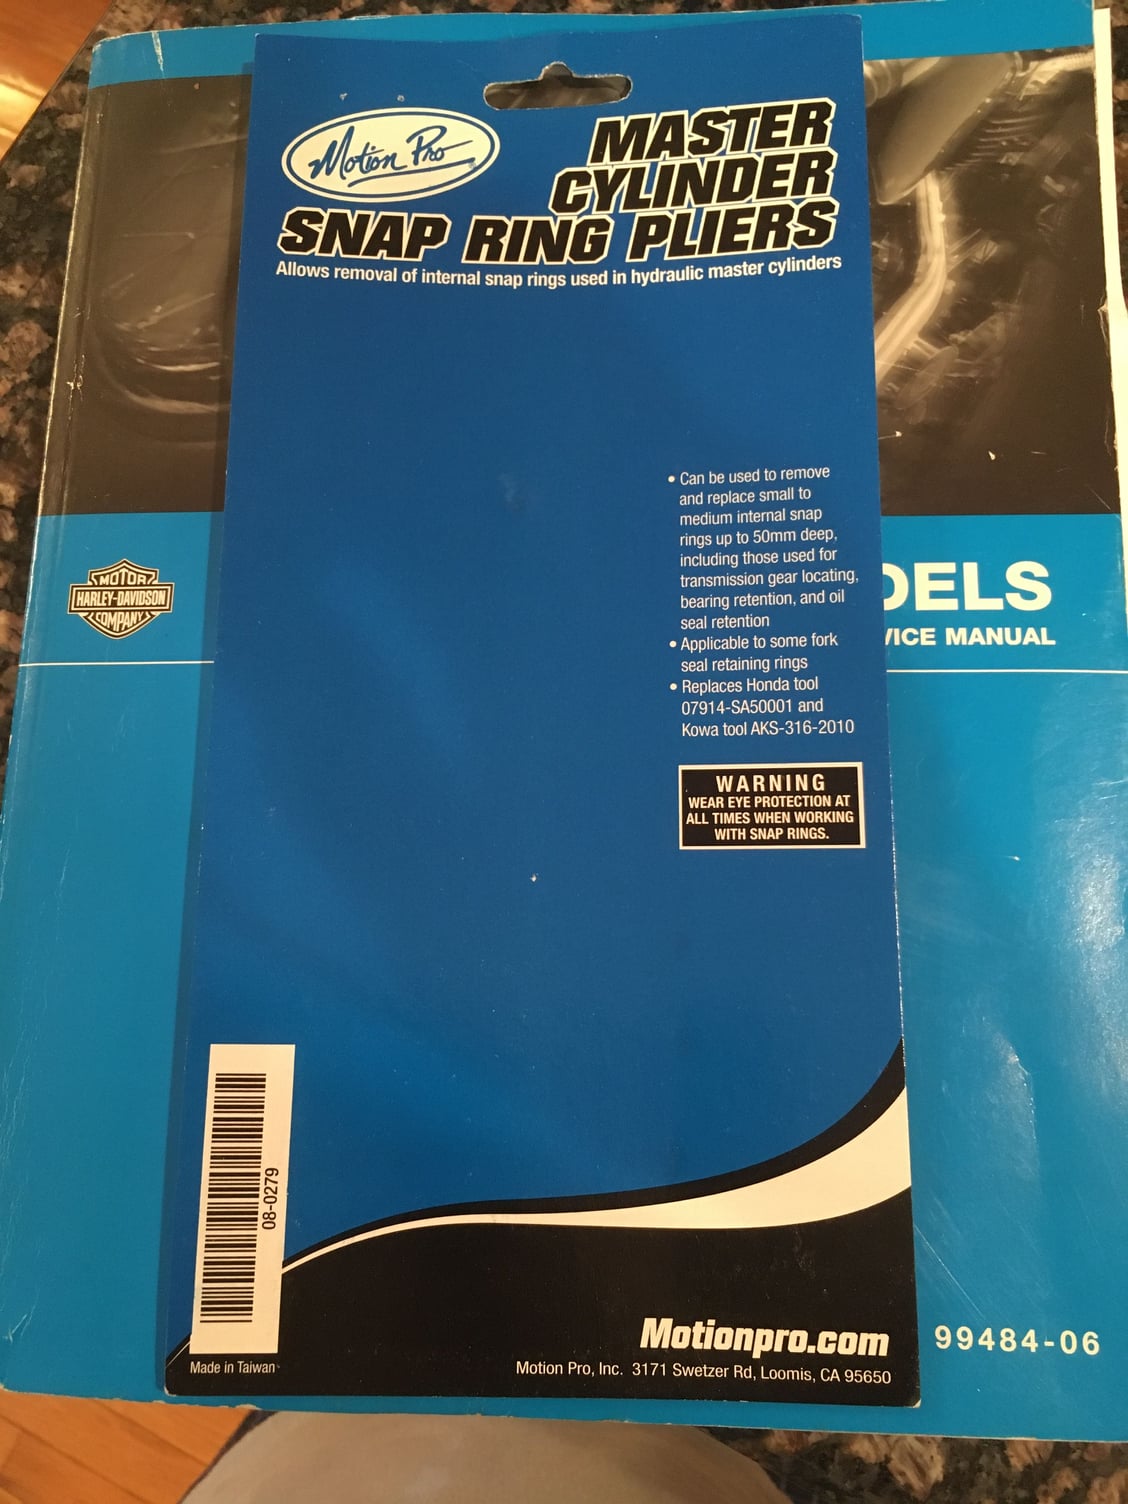 Master Cylinder Snap-Ring Pliers - Motion Pro